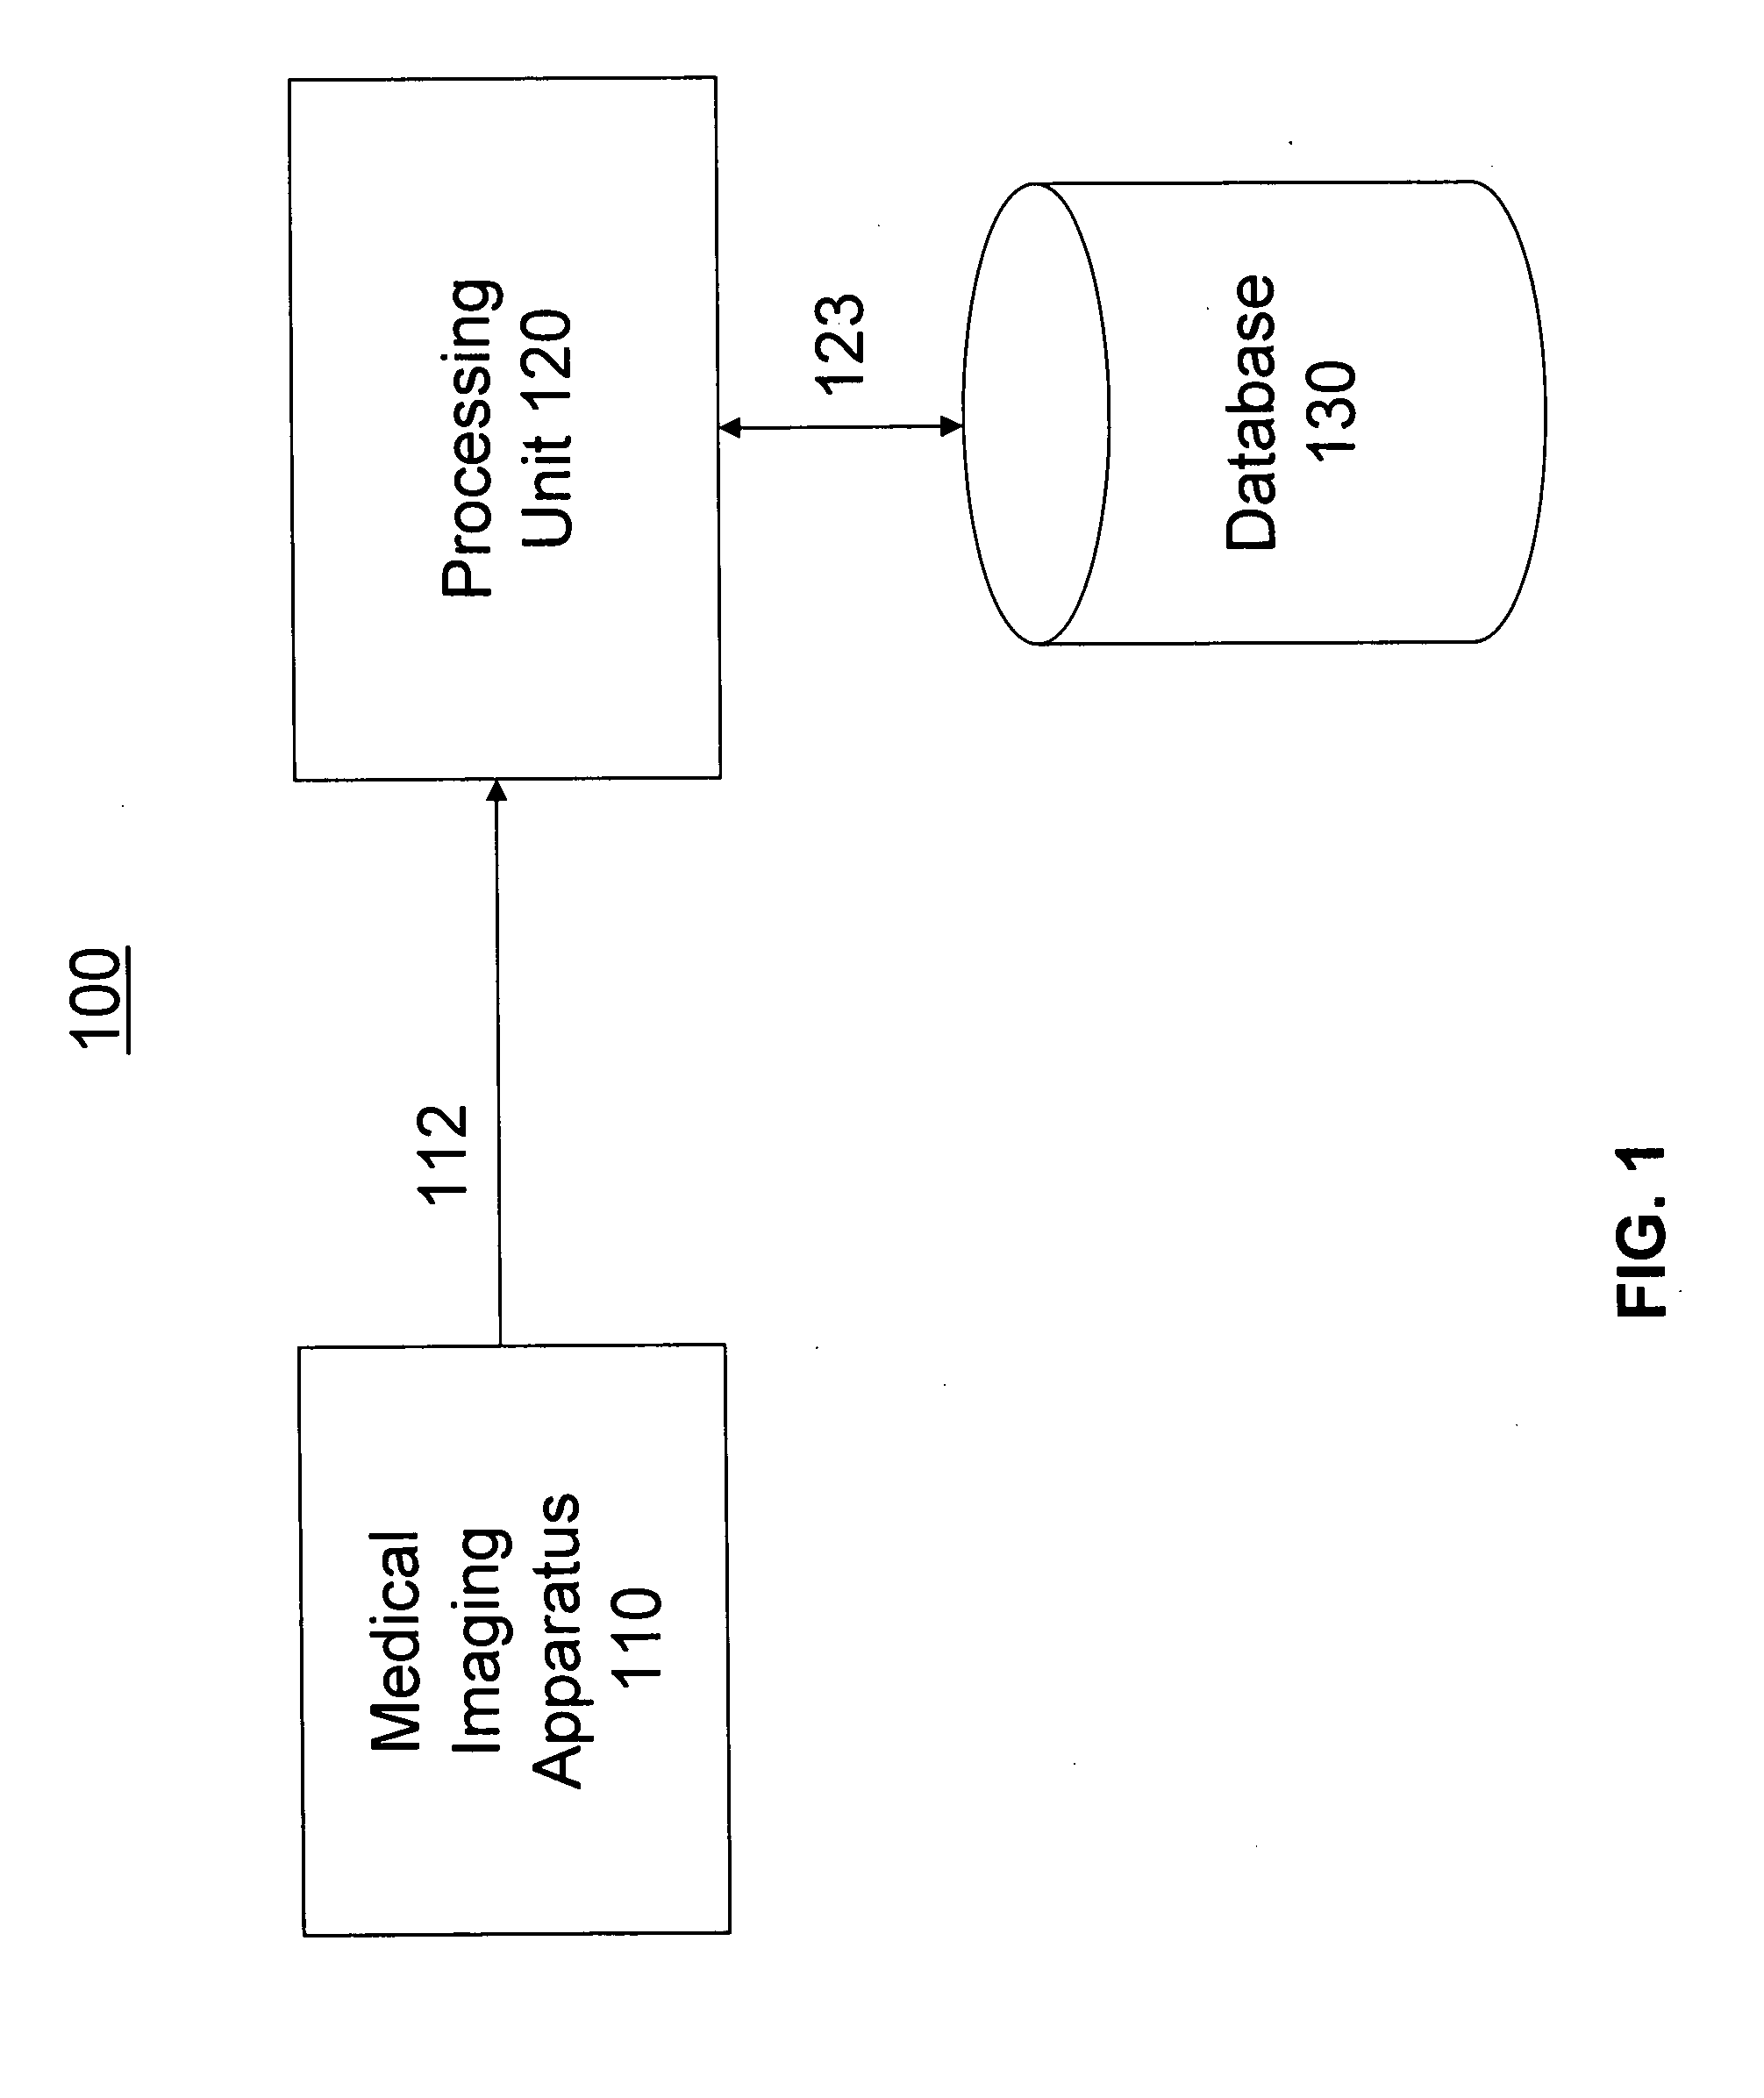 System and method for analyzing medical images